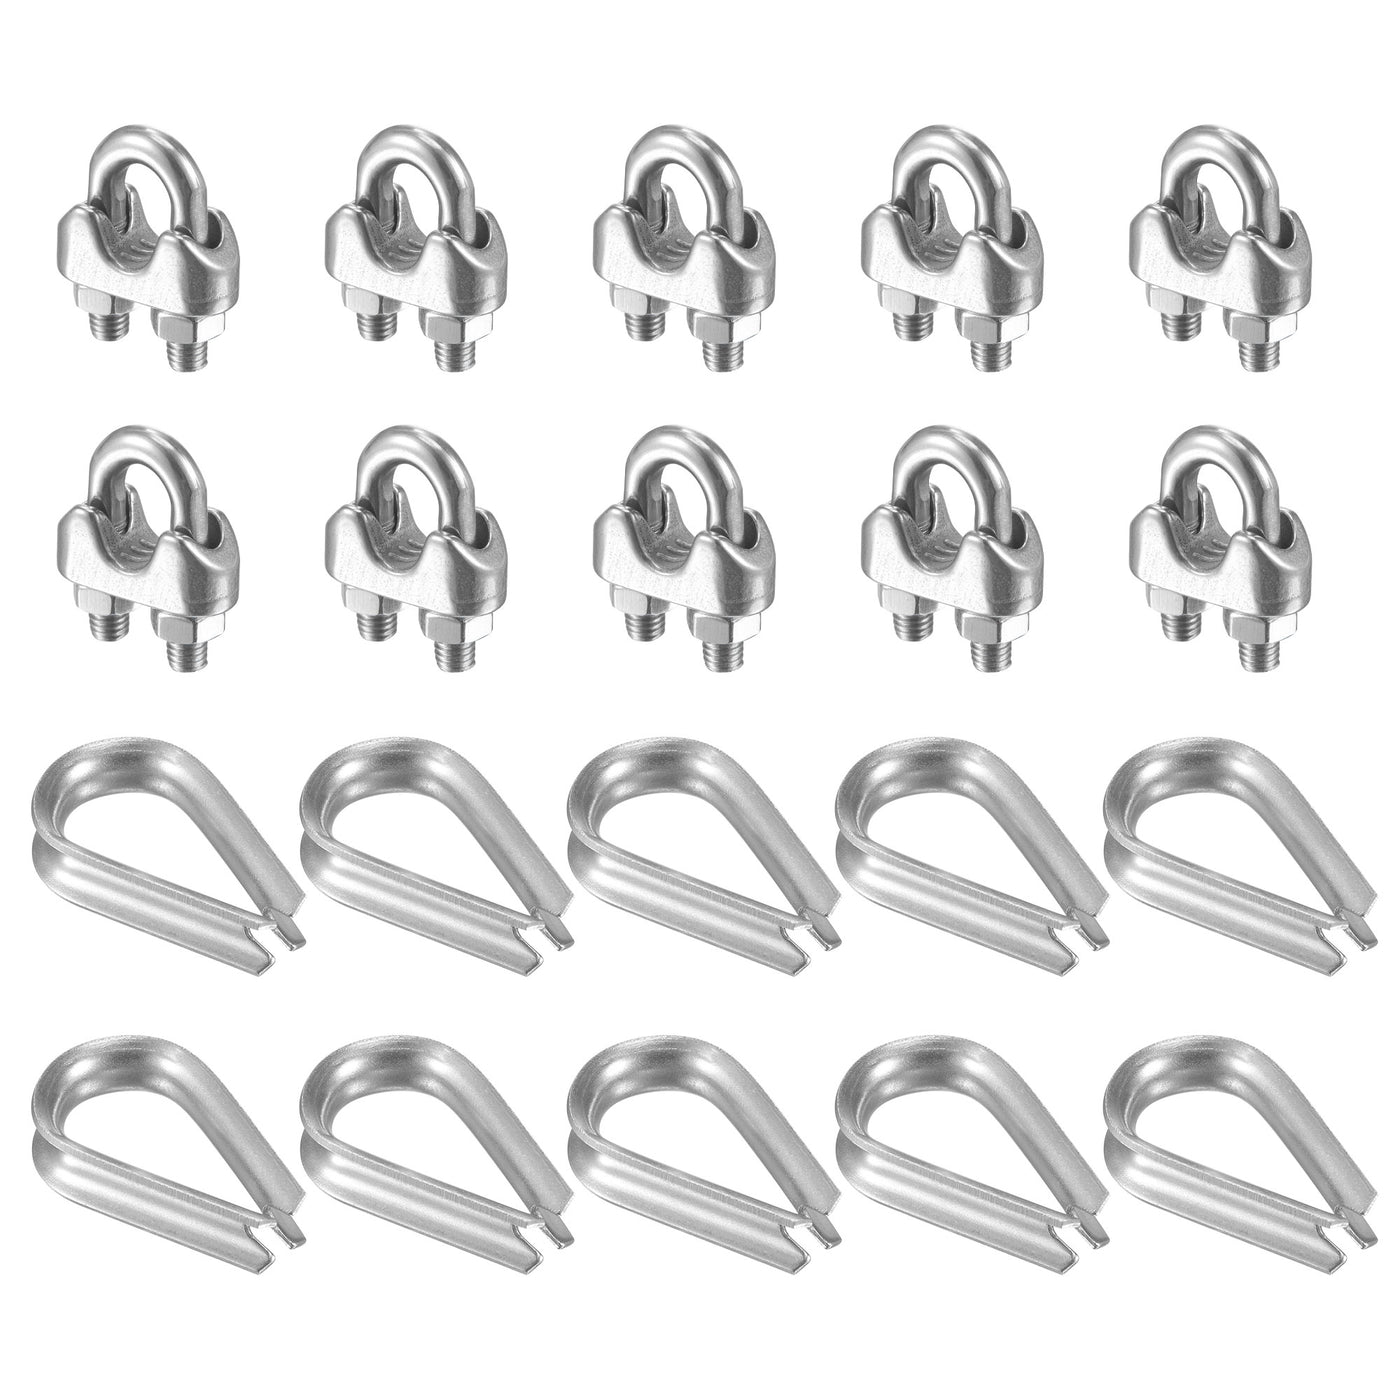 uxcell Uxcell Wire Rope Cable Clip Kit for M5, Included Rope Clamp 10Pcs and Thimble Rigging 10Pcs, 304 Stainless Steel U Bolt Saddle Fastener